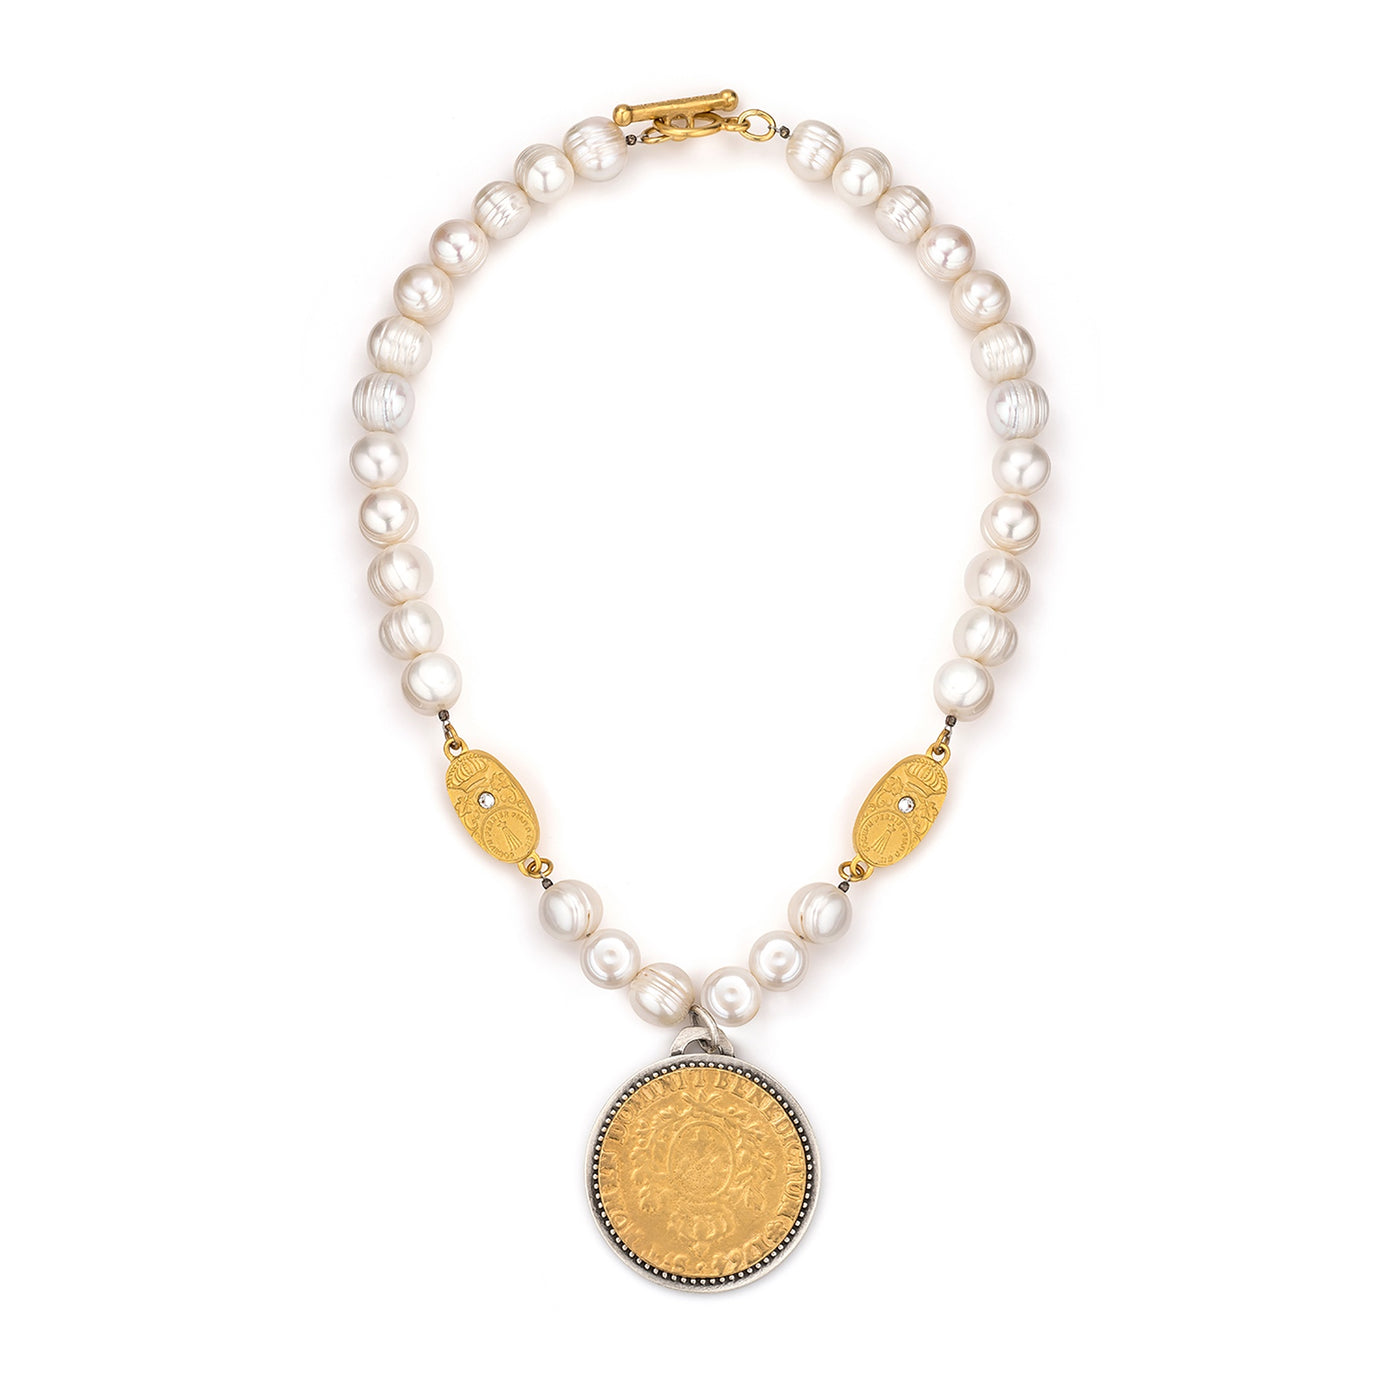 17" Freshwater Pearl Necklace with 14k Gold Medallion